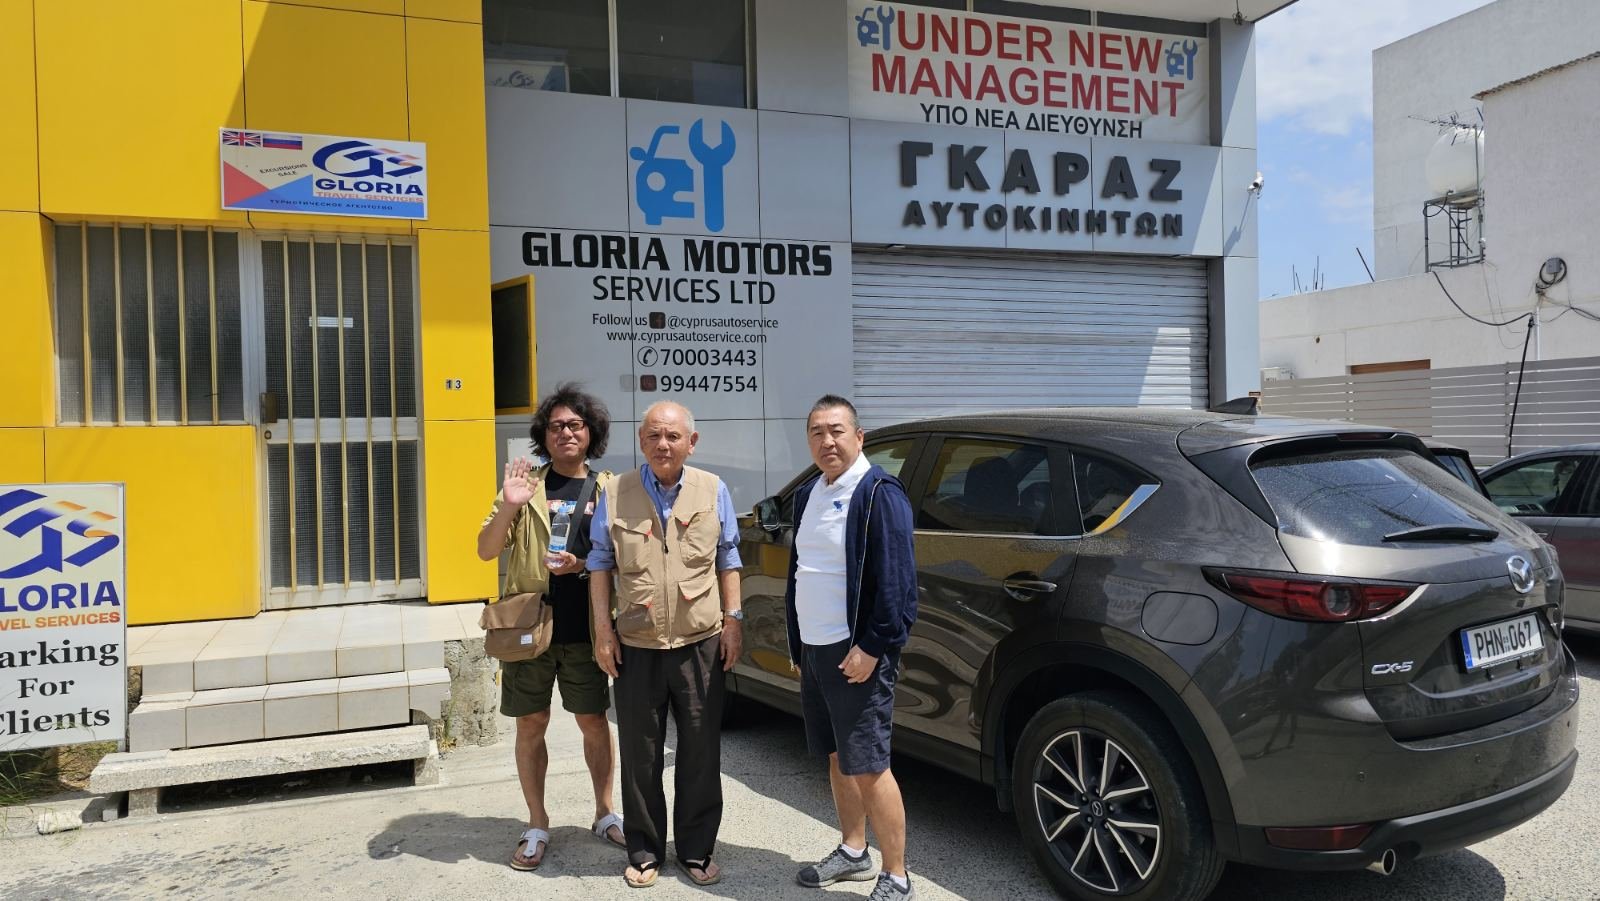 cyprusautoservice japanese office owners